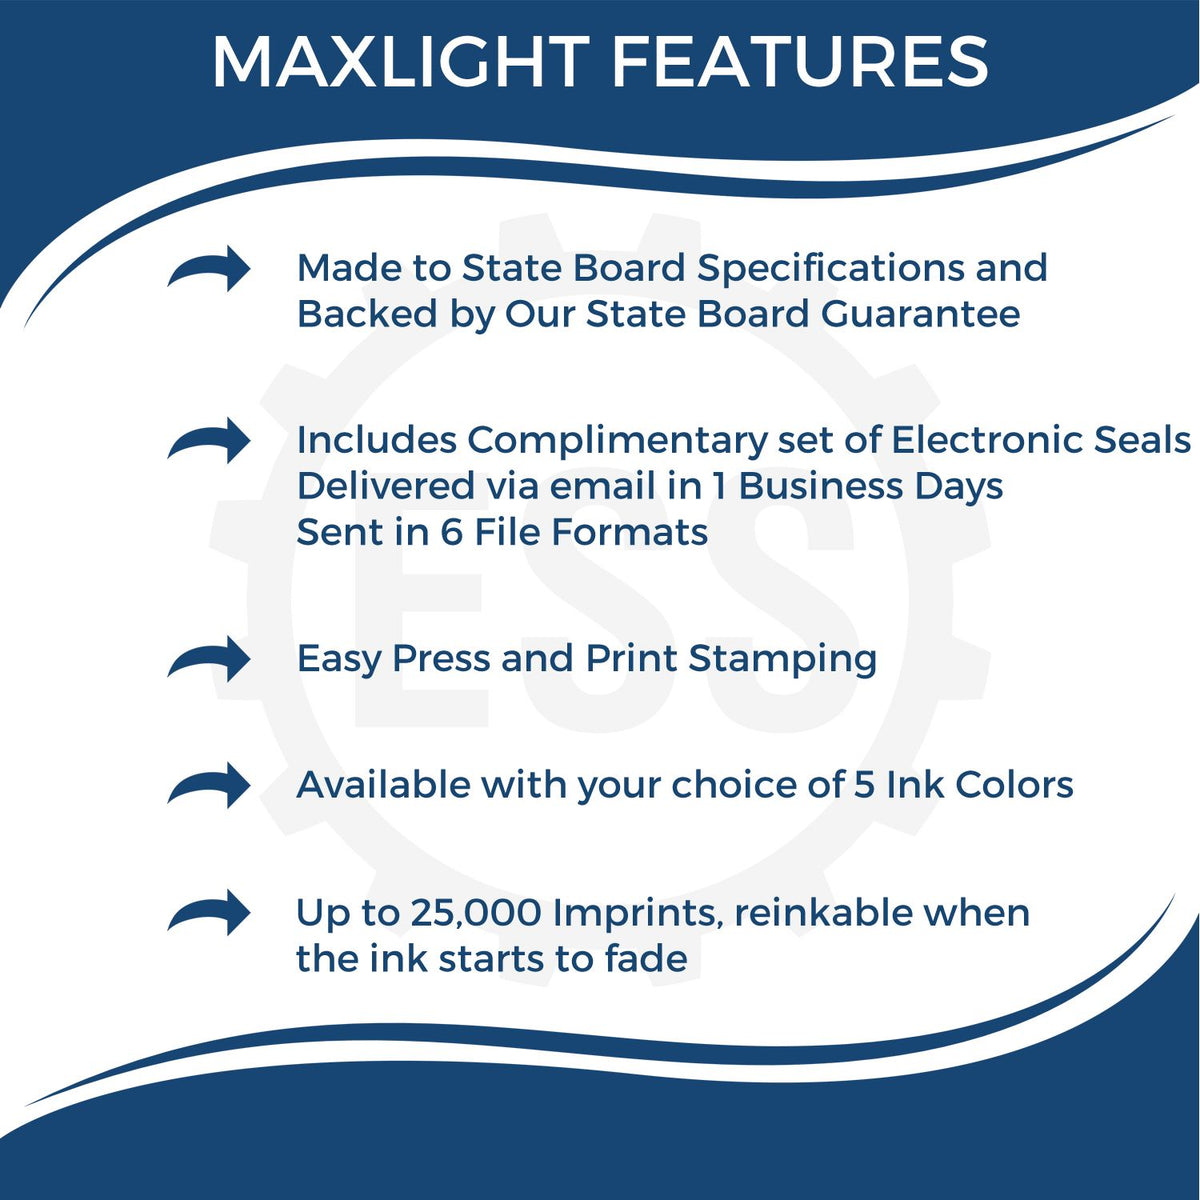 A picture of an infographic highlighting the selling points for the Premium MaxLight Pre-Inked Delaware Geology Stamp